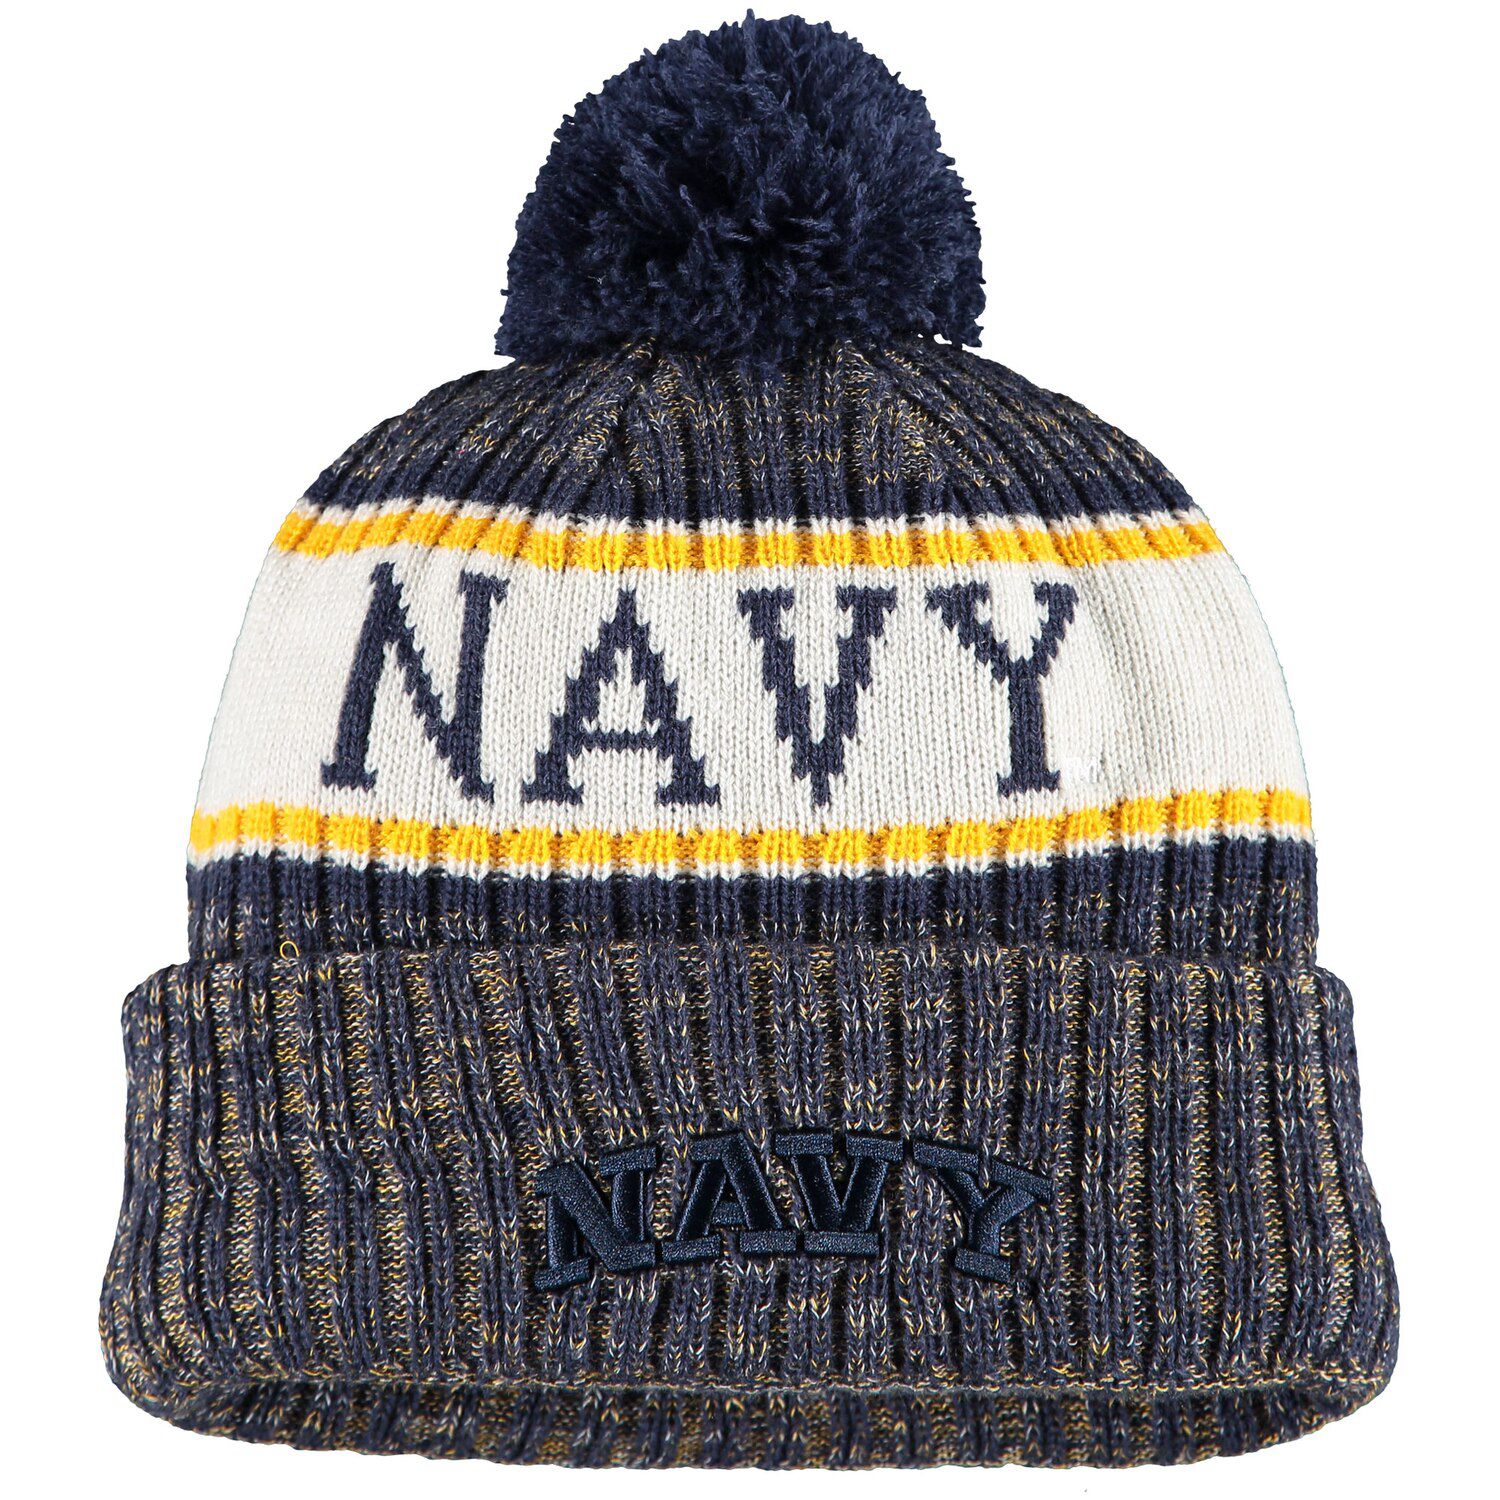 New Era Youth Boys Navy Detroit Tigers Striped Cuffed Knit Hat with Pom